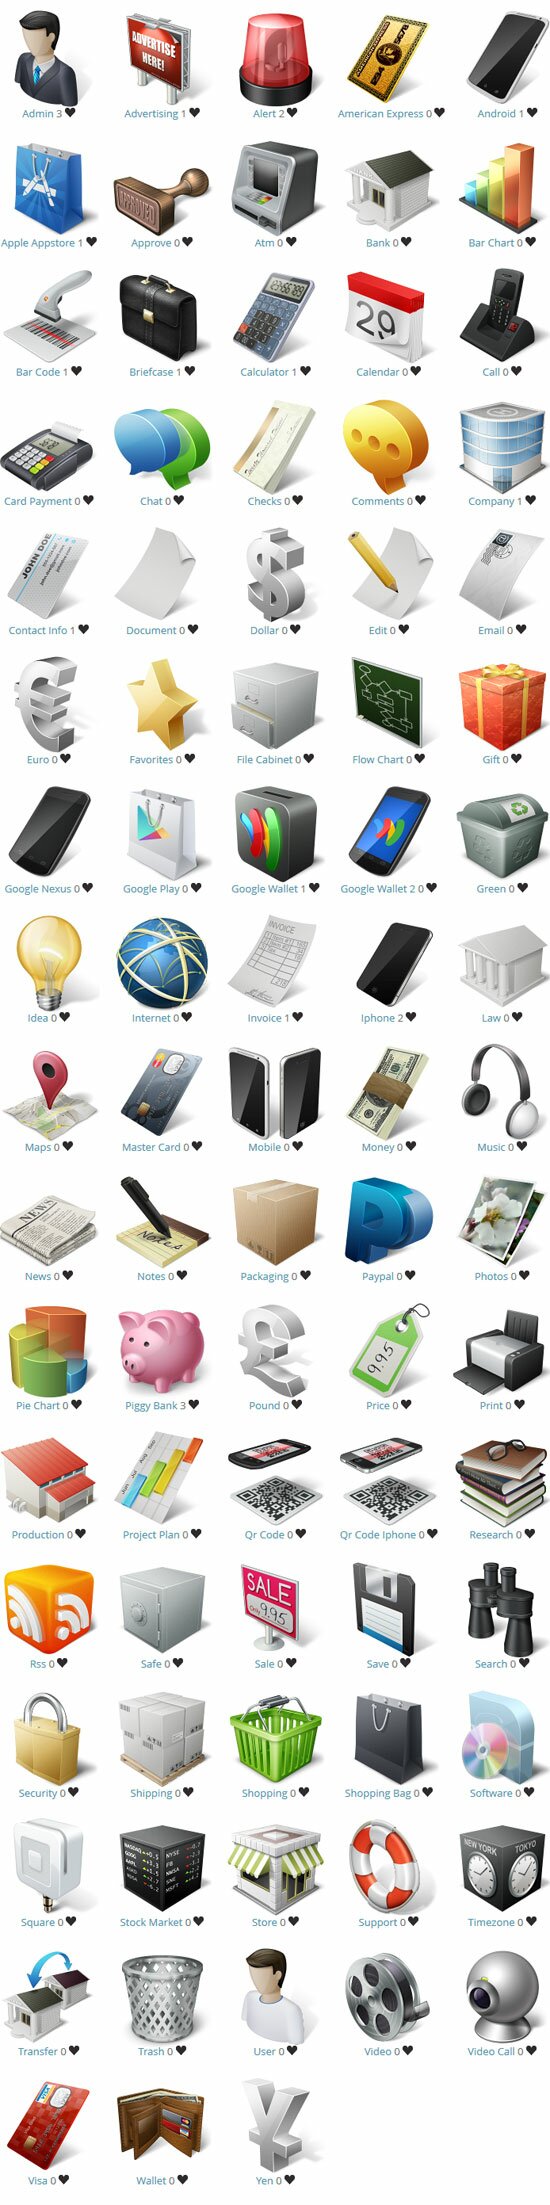 Ecommerce and business icons